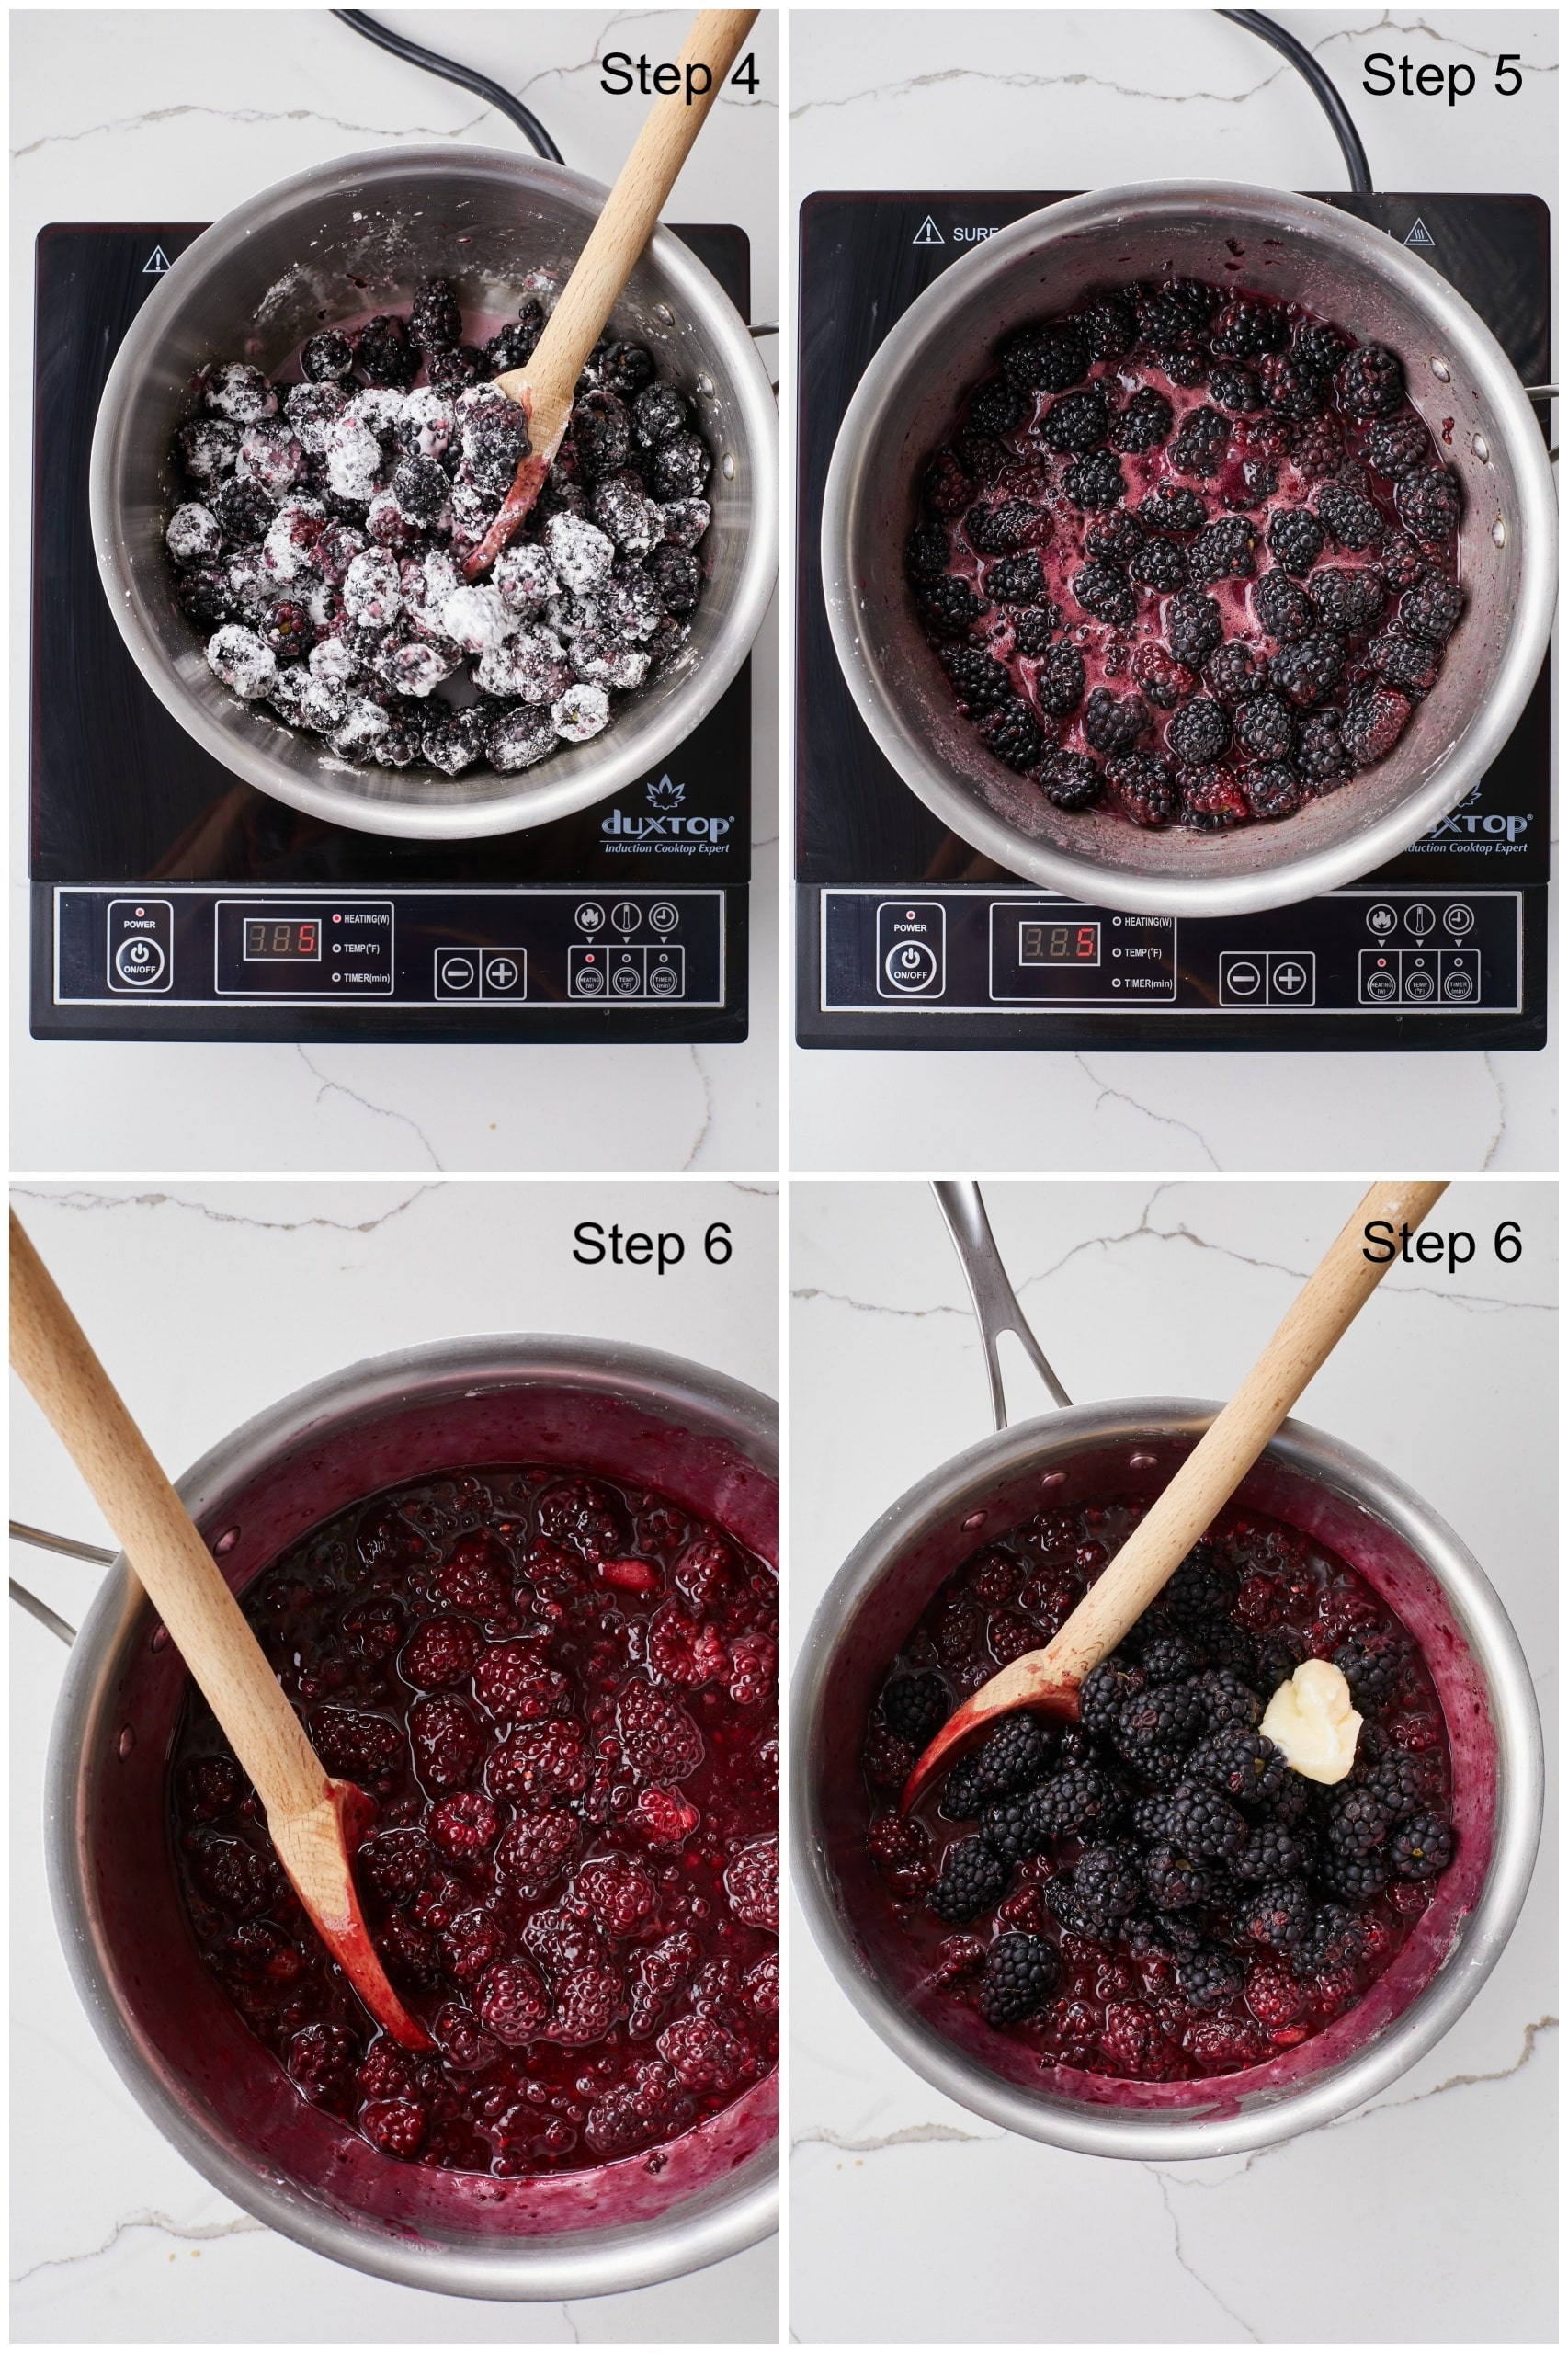 Step-by-step instructions on how to make Blackberry Pie: In a medium saucepan whisk together the sugar, cornstarch, salt and water. Add 2 cups (10 oz/284 g) of blackberries and bring to a simmer over medium-low heat, using a wooden spoon to slightly mash the berries as they cook. Let the mixture simmer vigorously for 1 or 2 minutes, stirring constantly, until thickened and clear. Remove from the heat, stir in the remaining 3 cups (15 oz/426 g) blackberries, butter and lemon juice until well combined